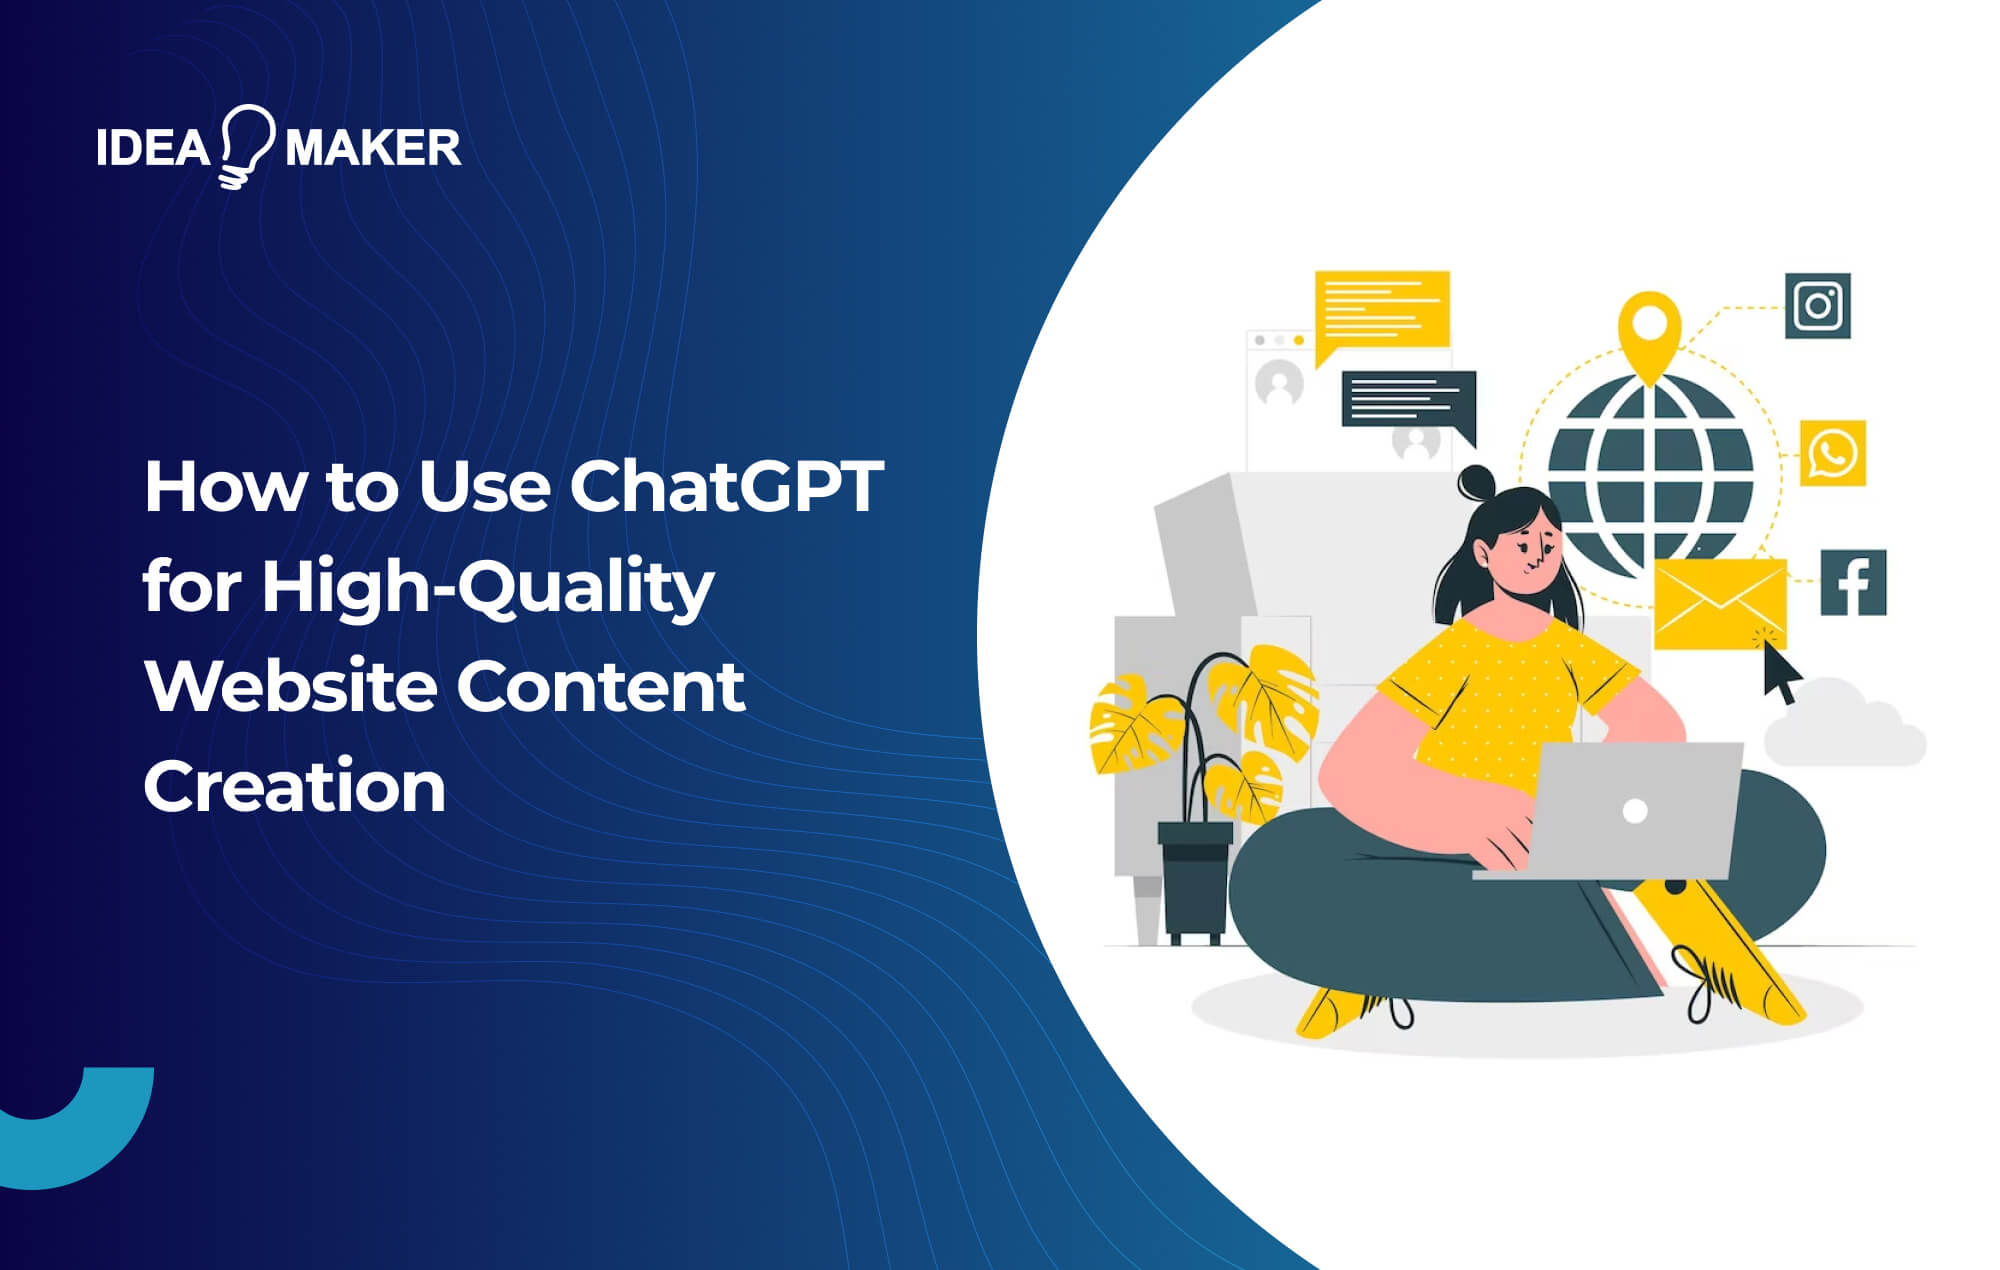 Ideamaker - How to Use ChatGPT for High-Quality Website Content Creation